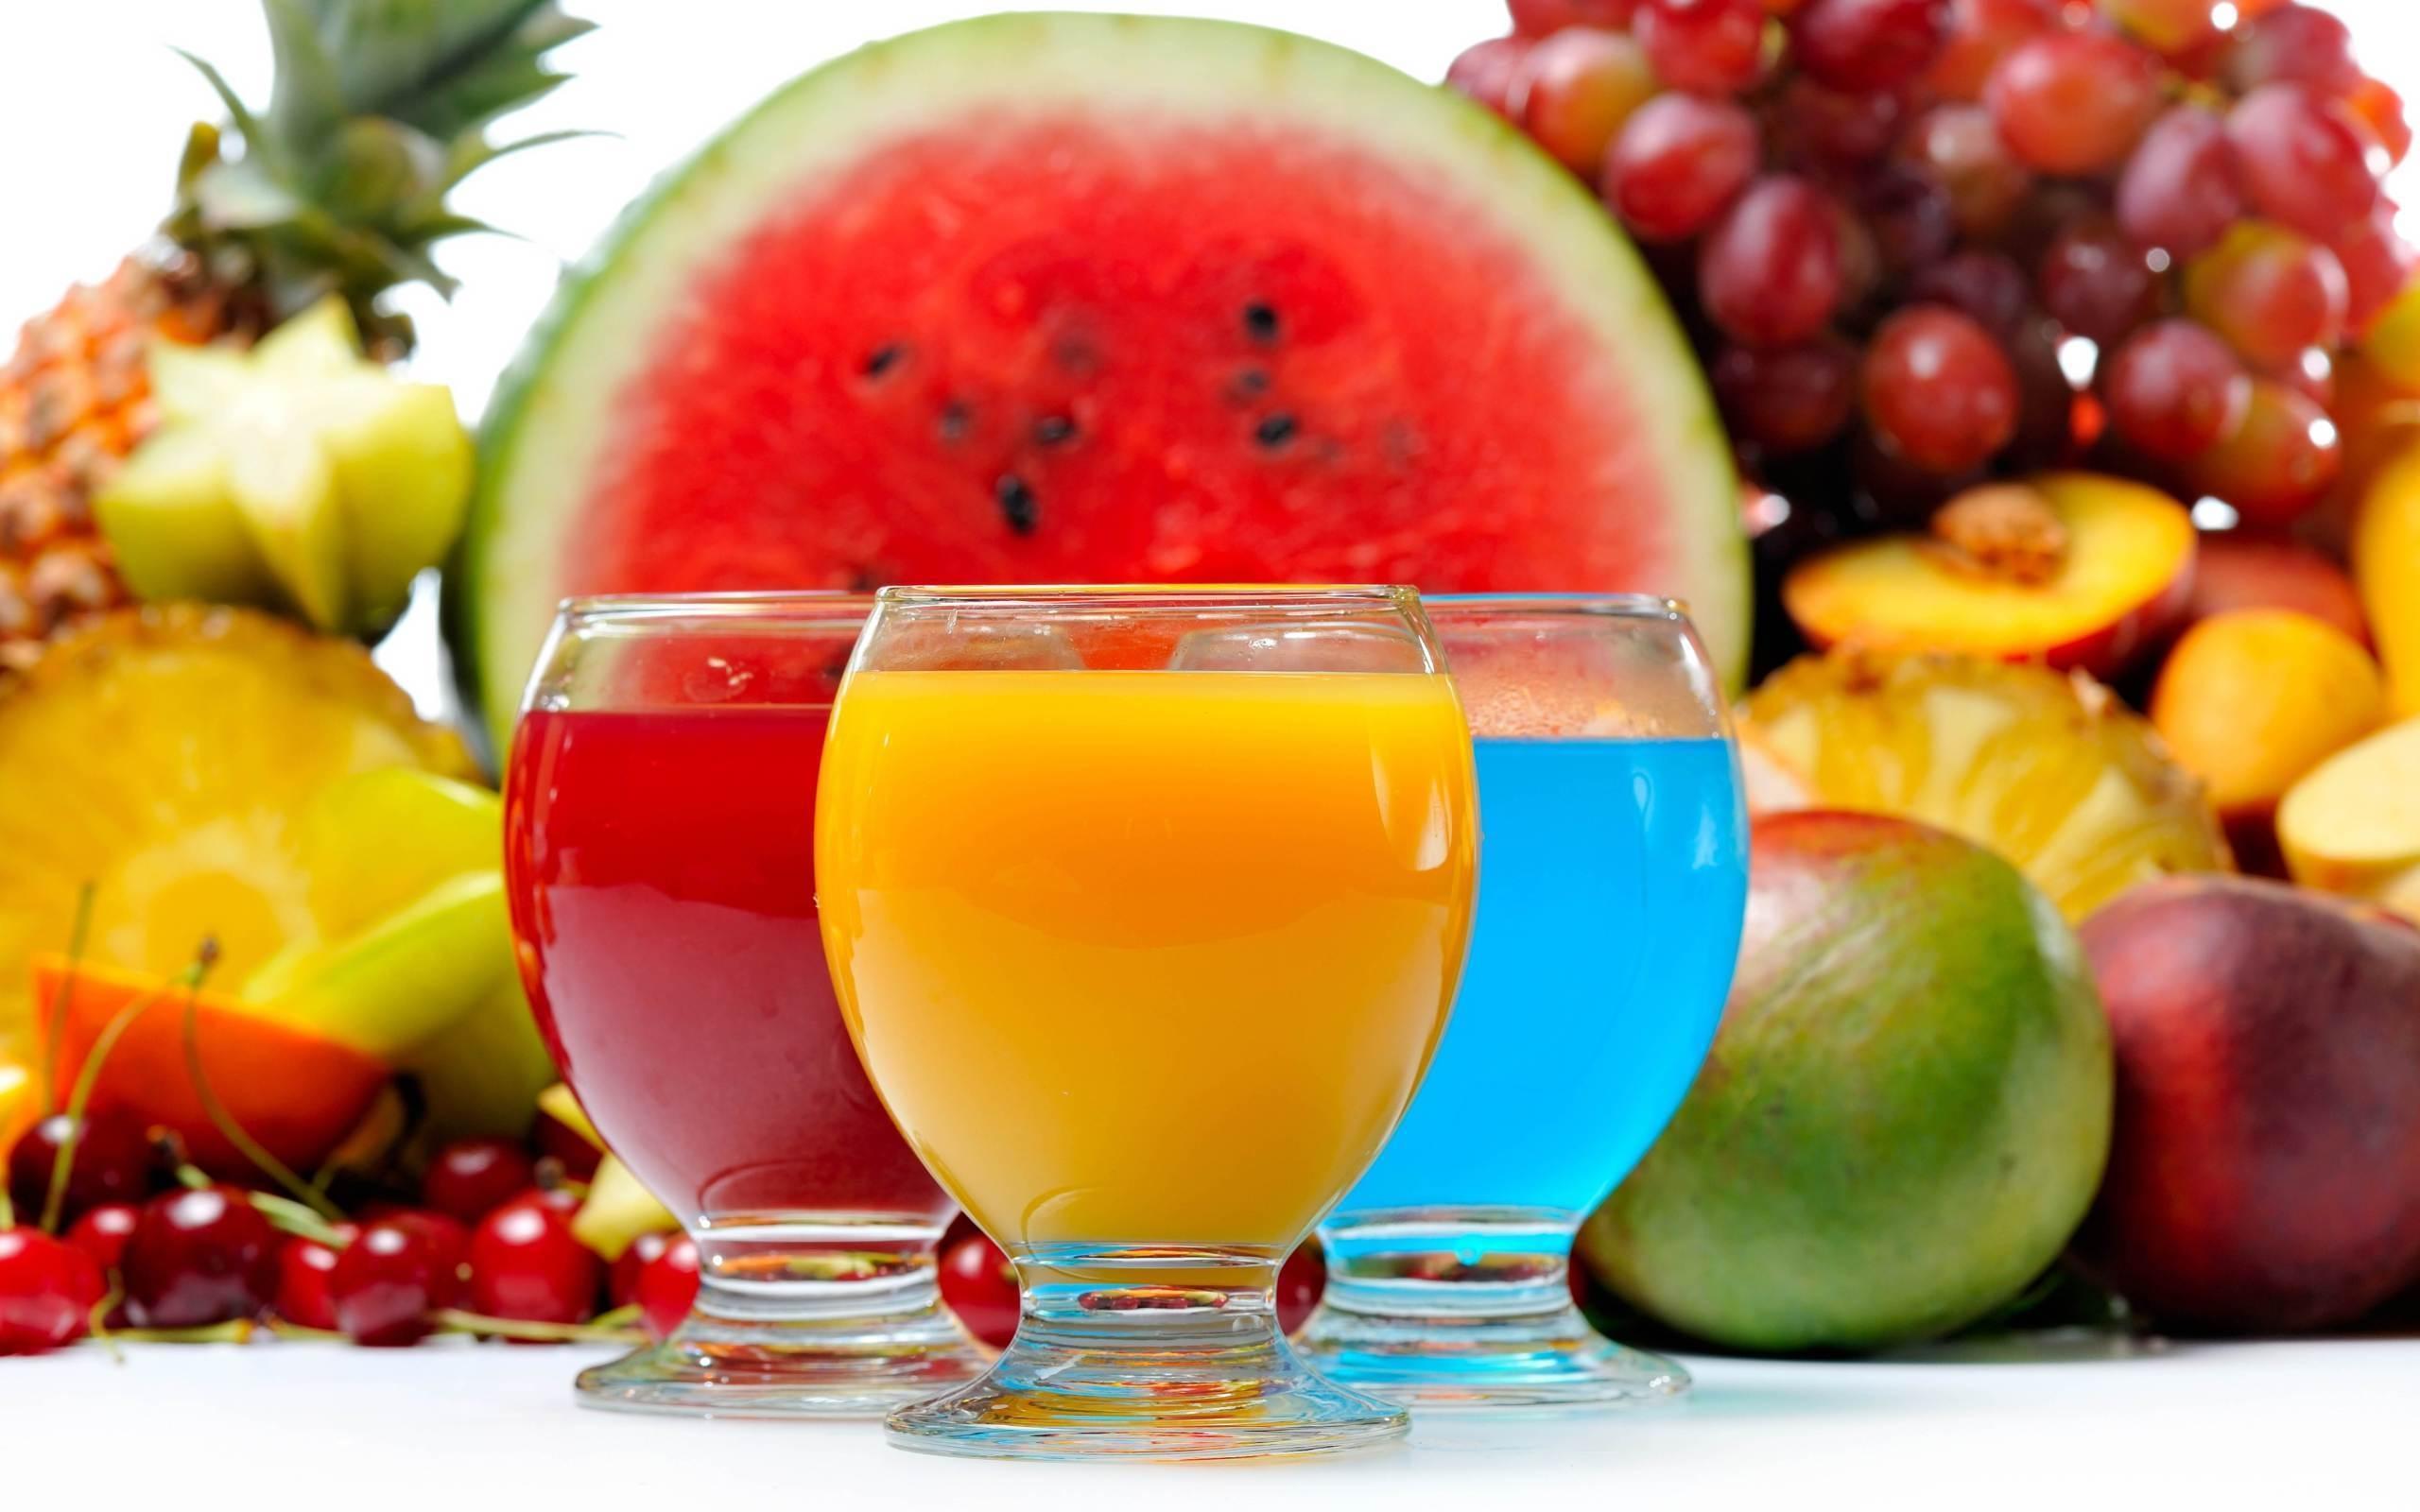 Fruit Drink Wallpaper High Quality